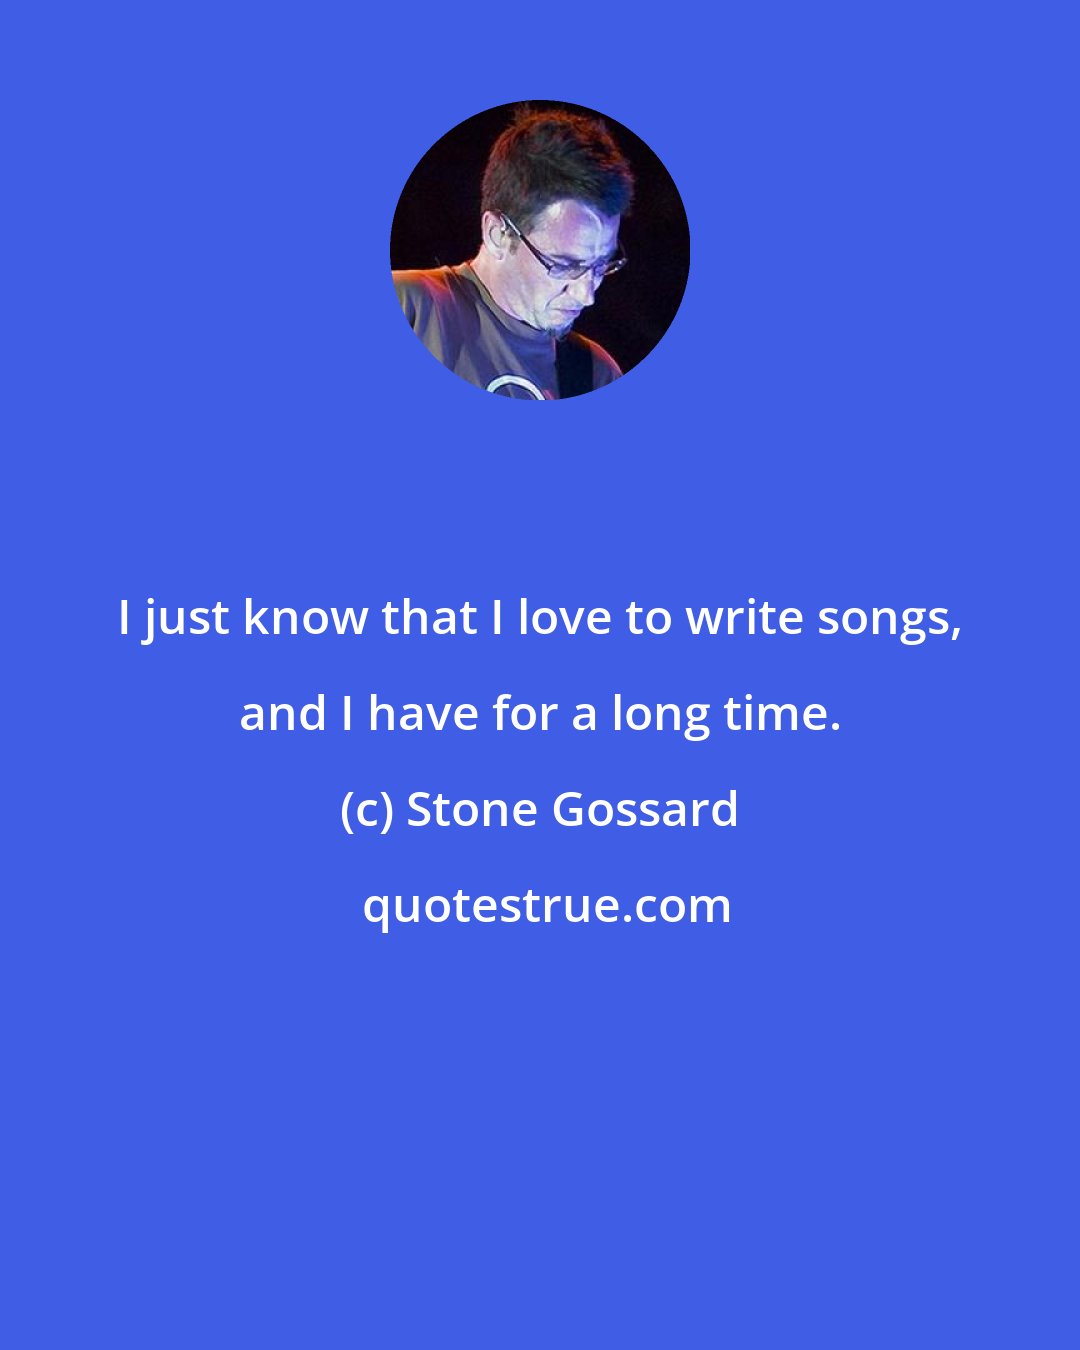 Stone Gossard: I just know that I love to write songs, and I have for a long time.